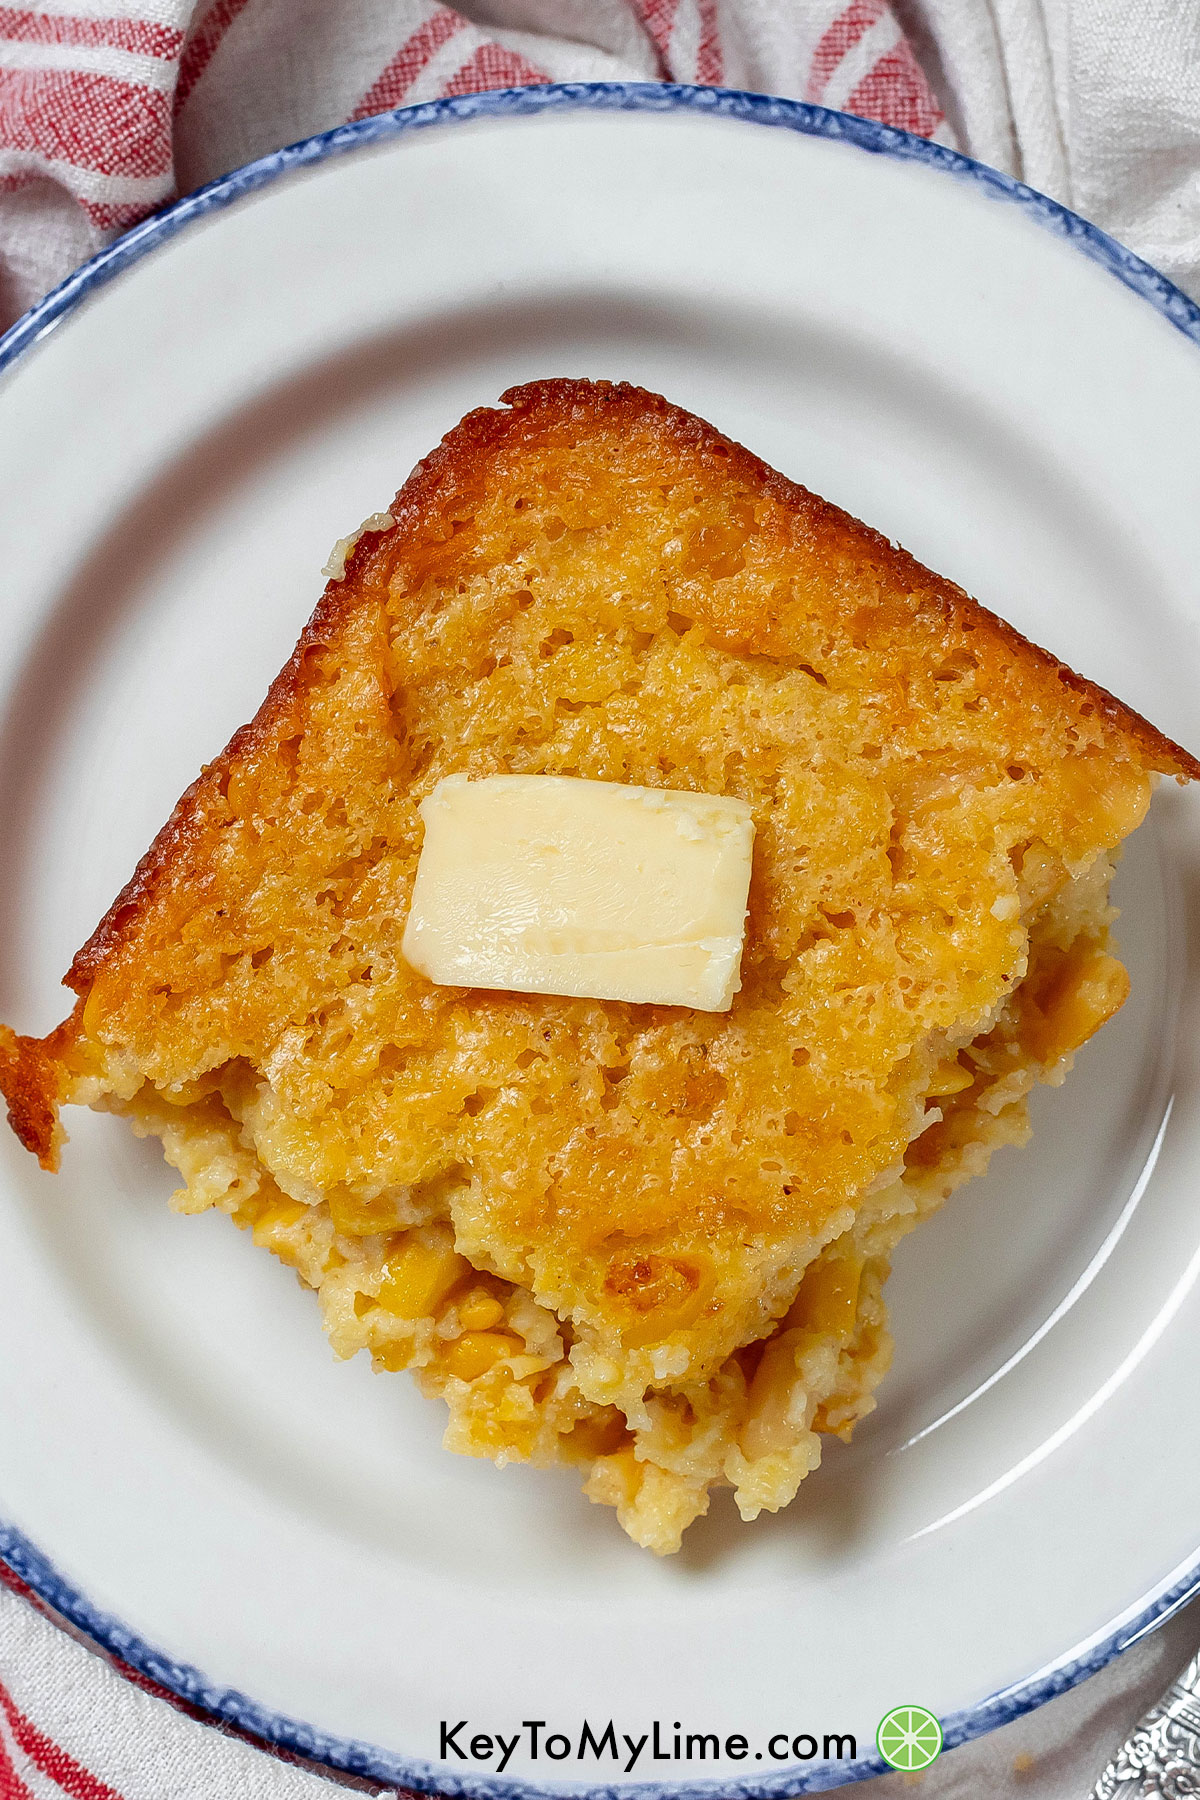 A serving of corn casserole with golden edges and a slab of melted butter on top.